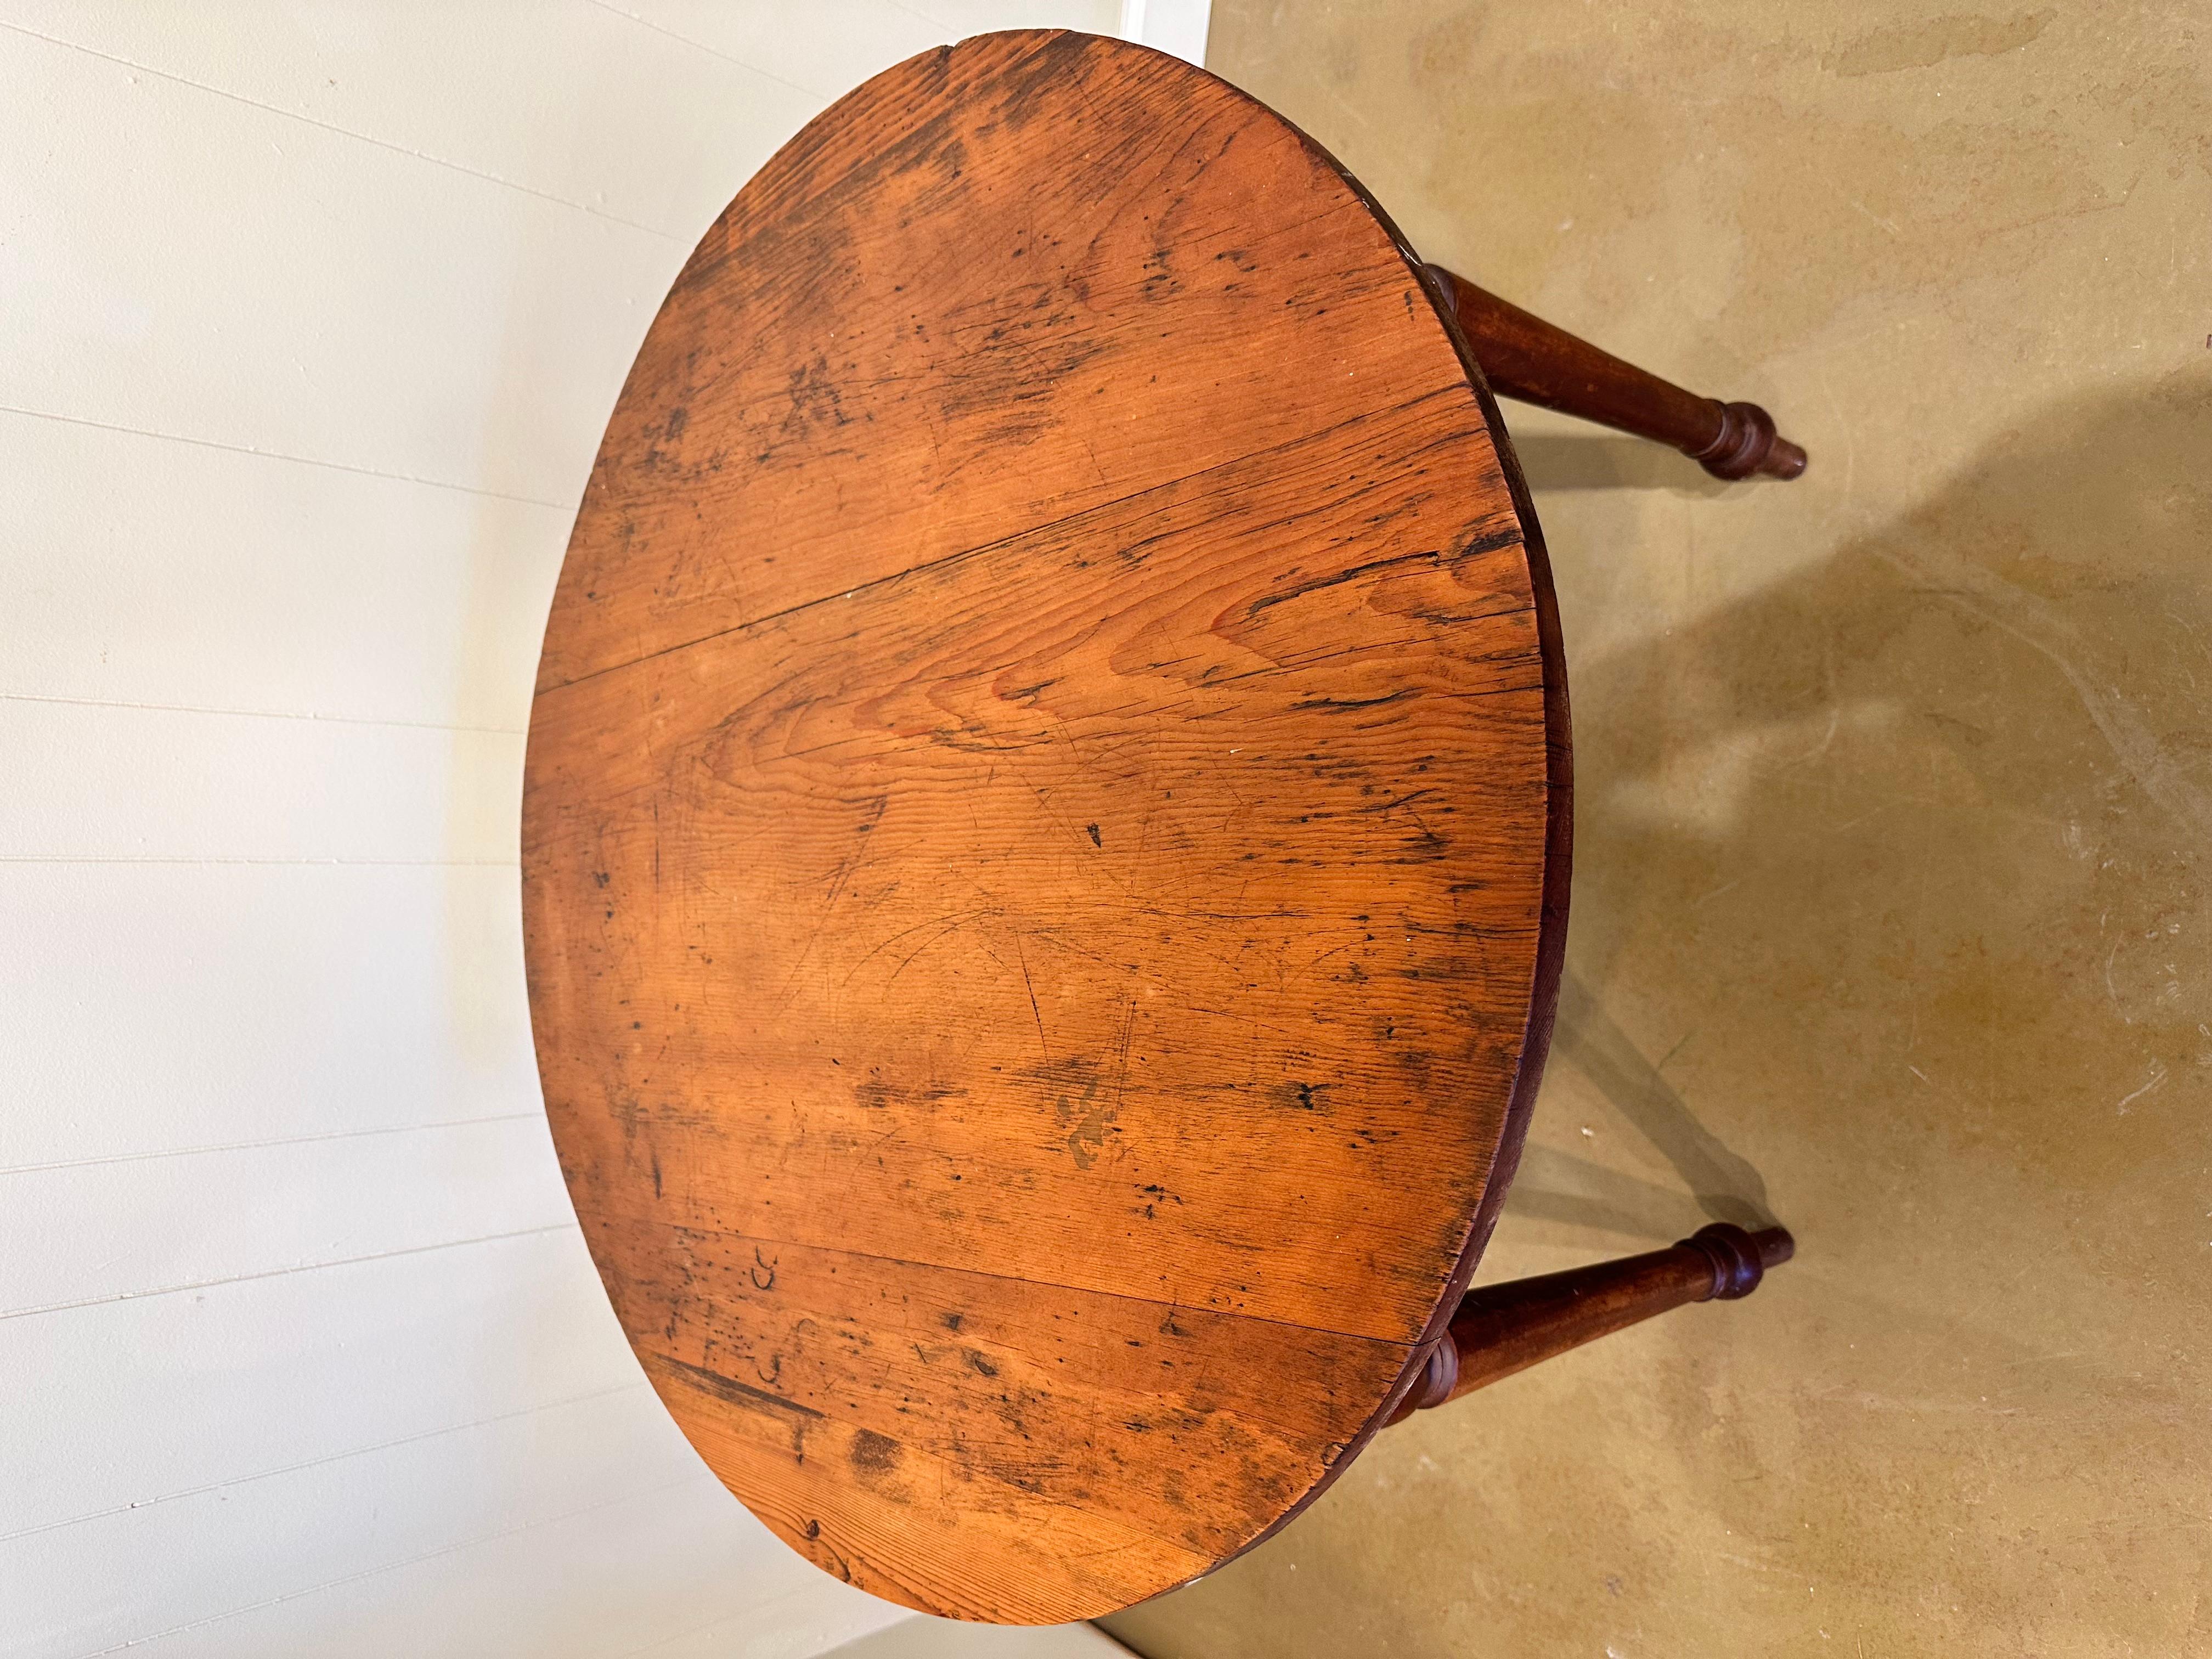 This is an adorable little English cricket table! It has such an amazing patina the height makes it a perfect piece beside a chair or sofa. The rich deep wood tones of the table blend together beautifully and are intensified by this piece's lovely